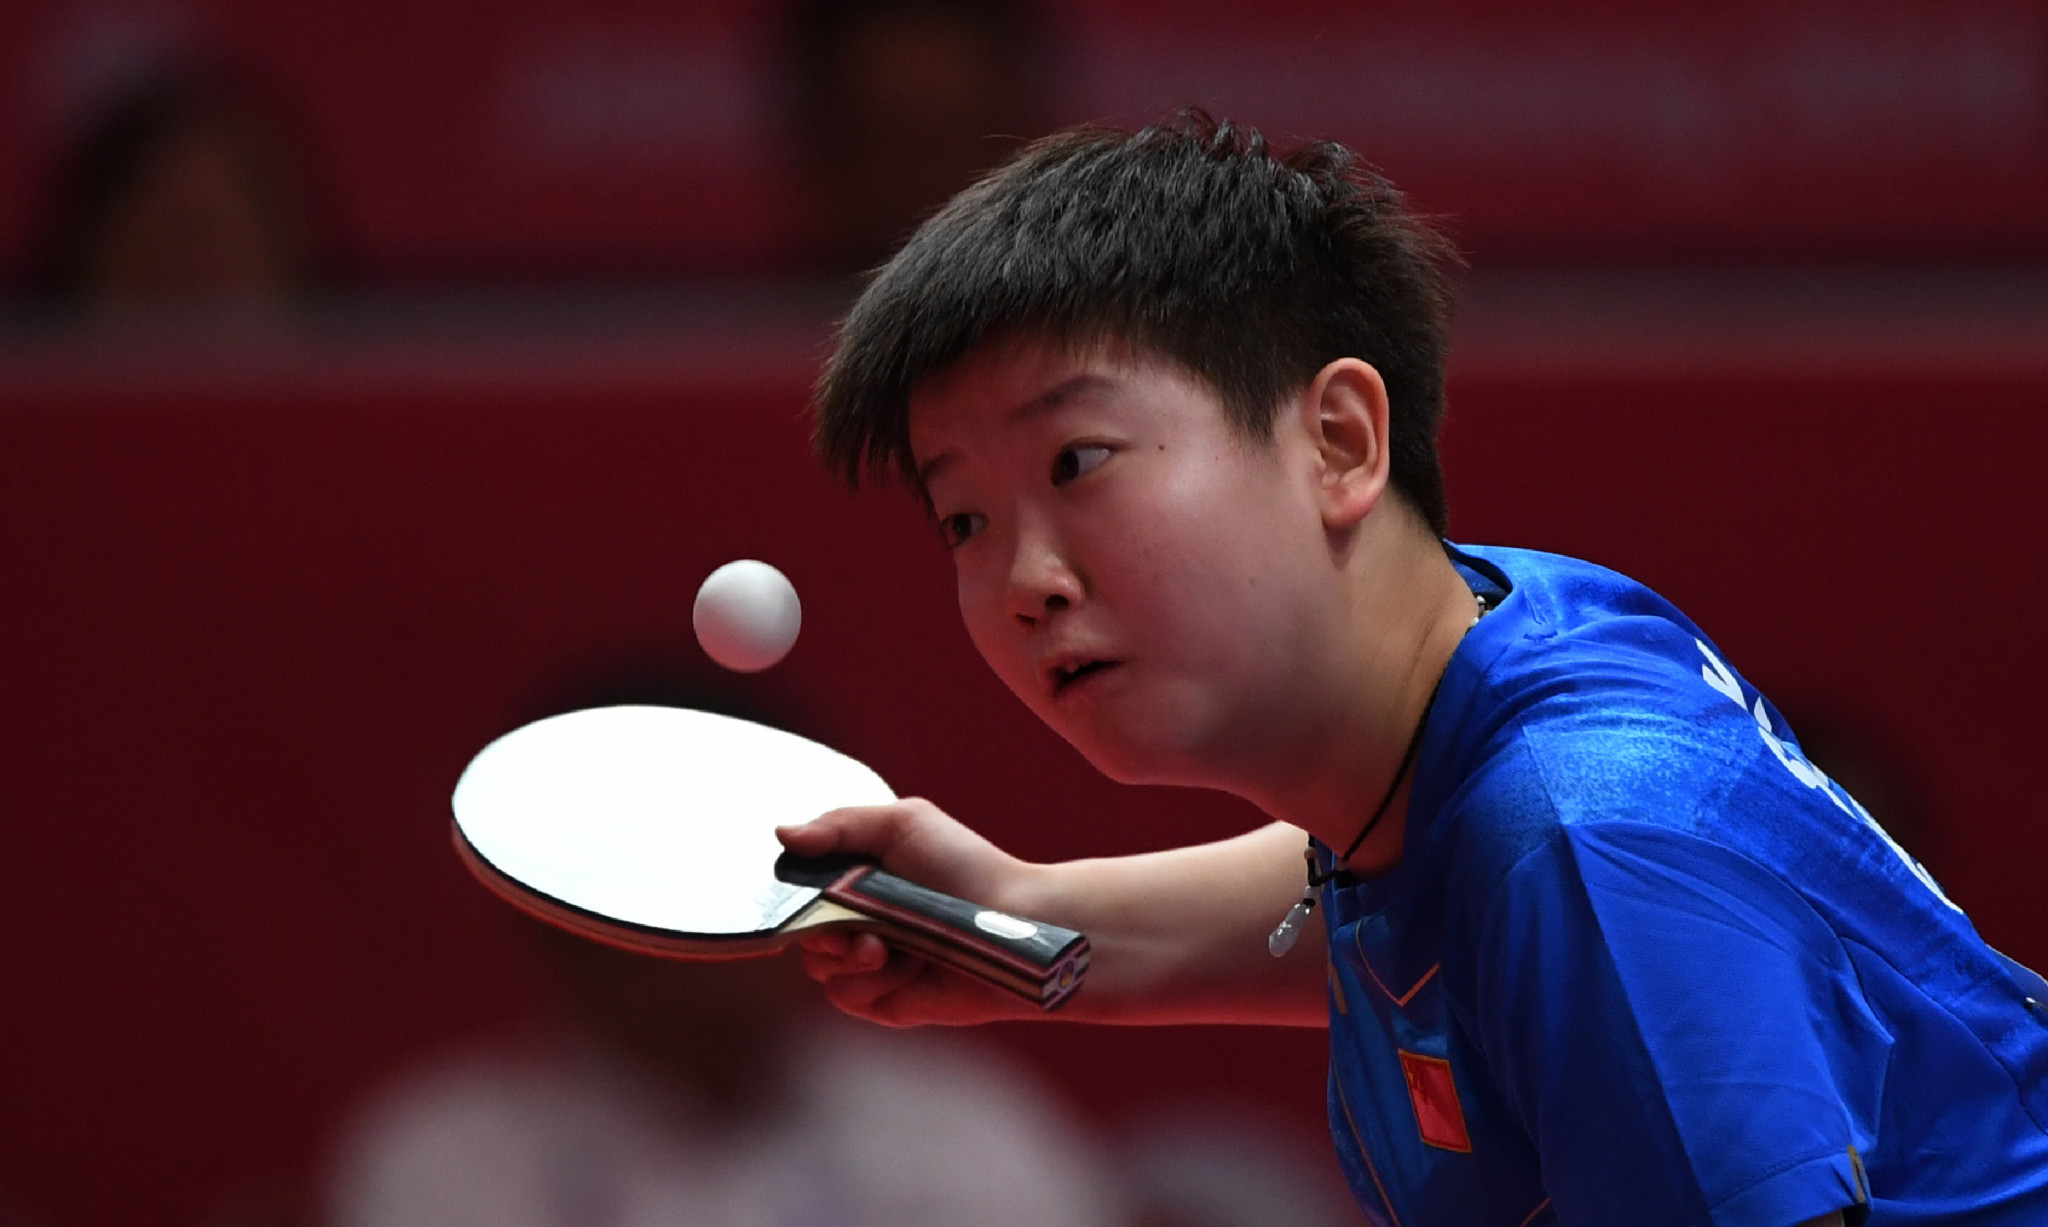 Table tennis player Sun Yingsha will arrive at Buenos Aires 2018 having won a gold medal at the Asian Games in Jakarta last month ©Getty Images